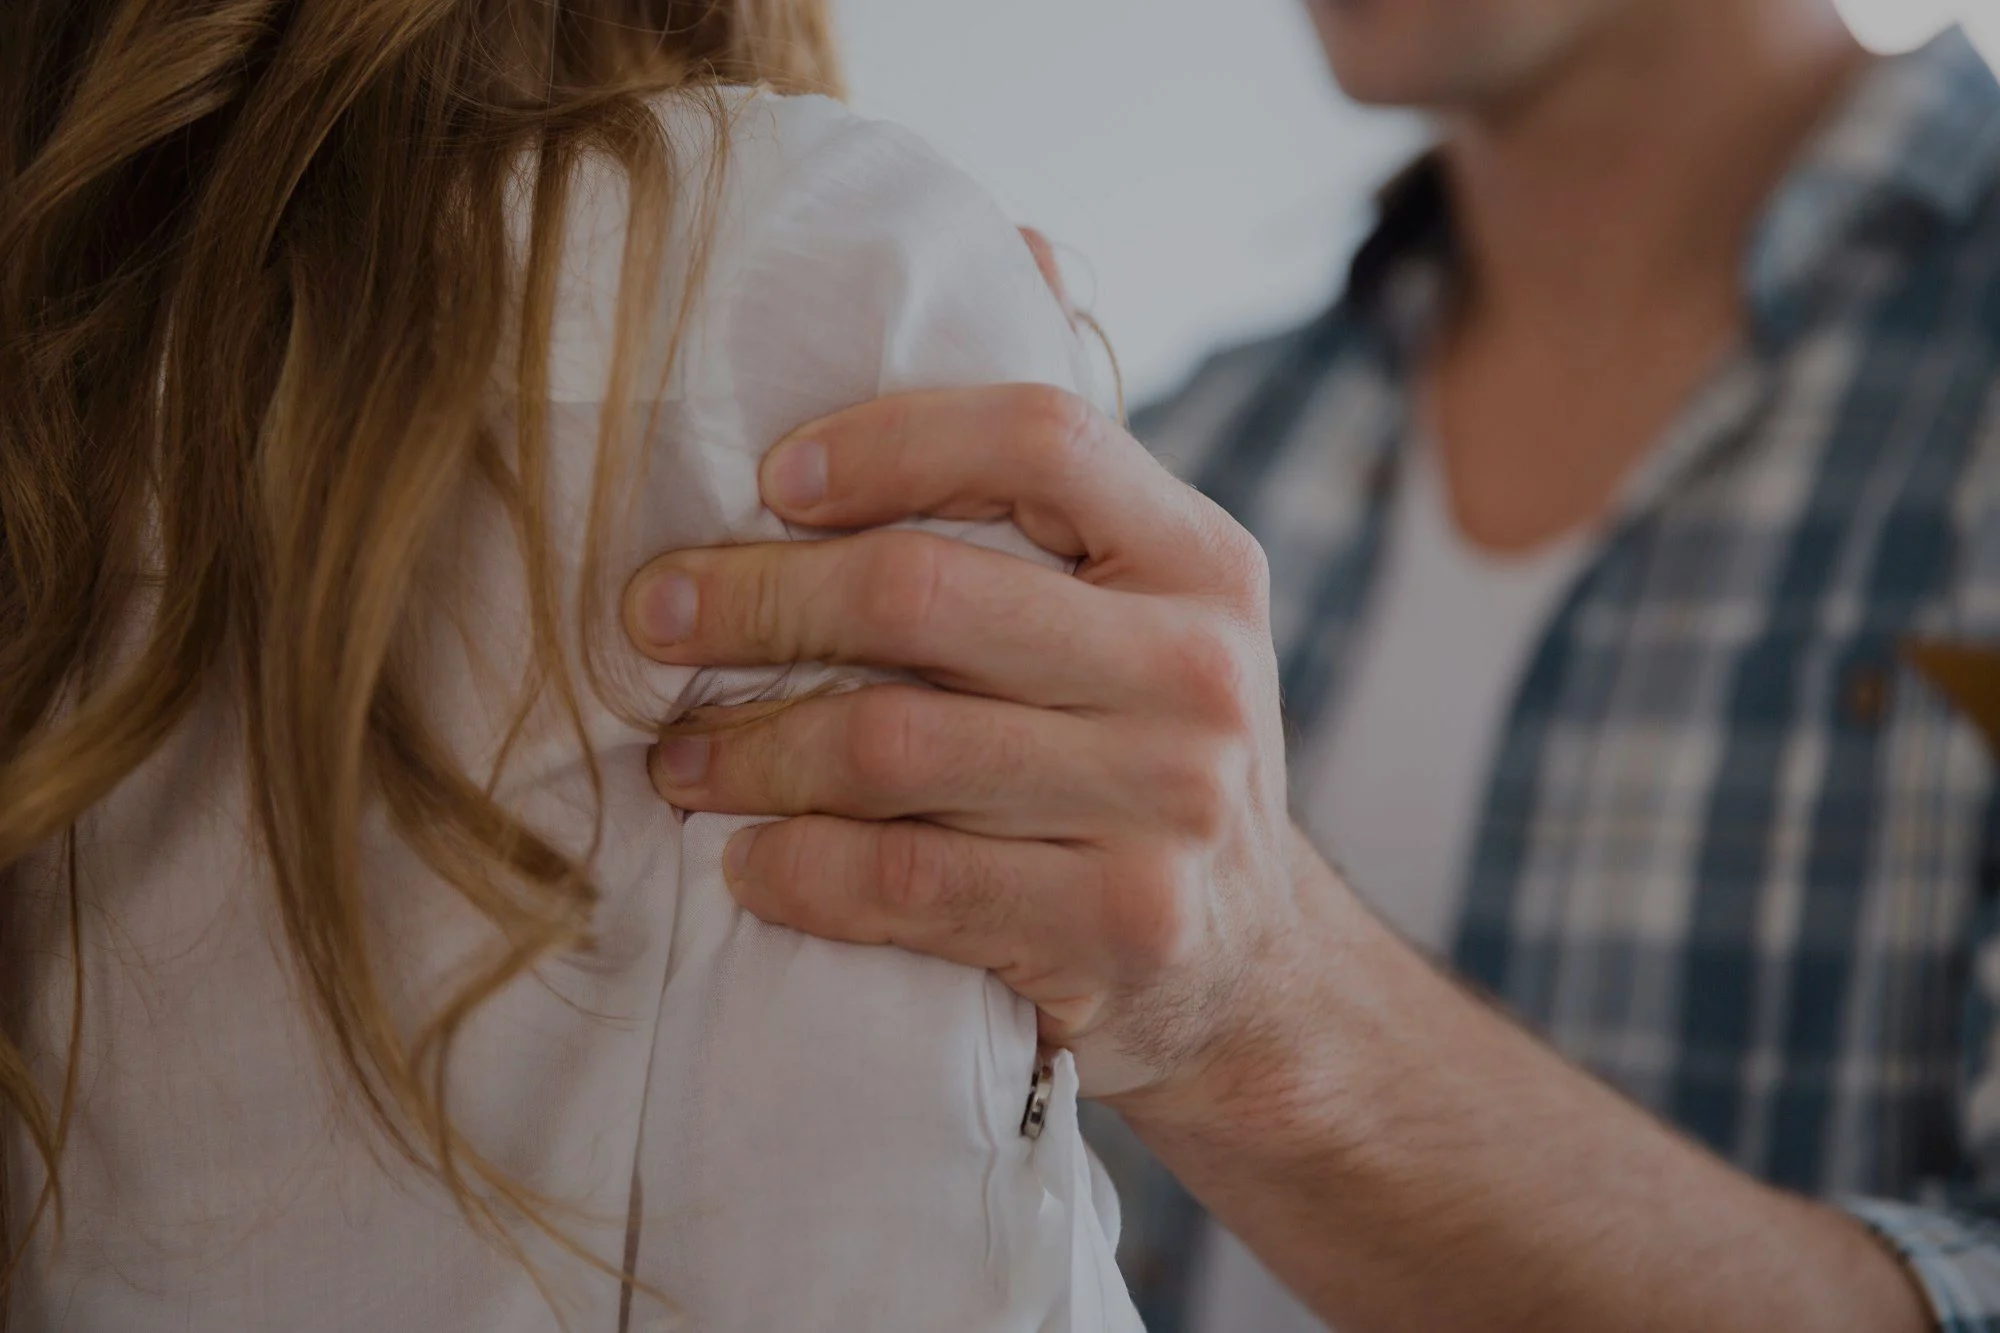 A hand grabbing somebodies shoulder demonstrating domestic violence. Picture courtesy of Shutterstock